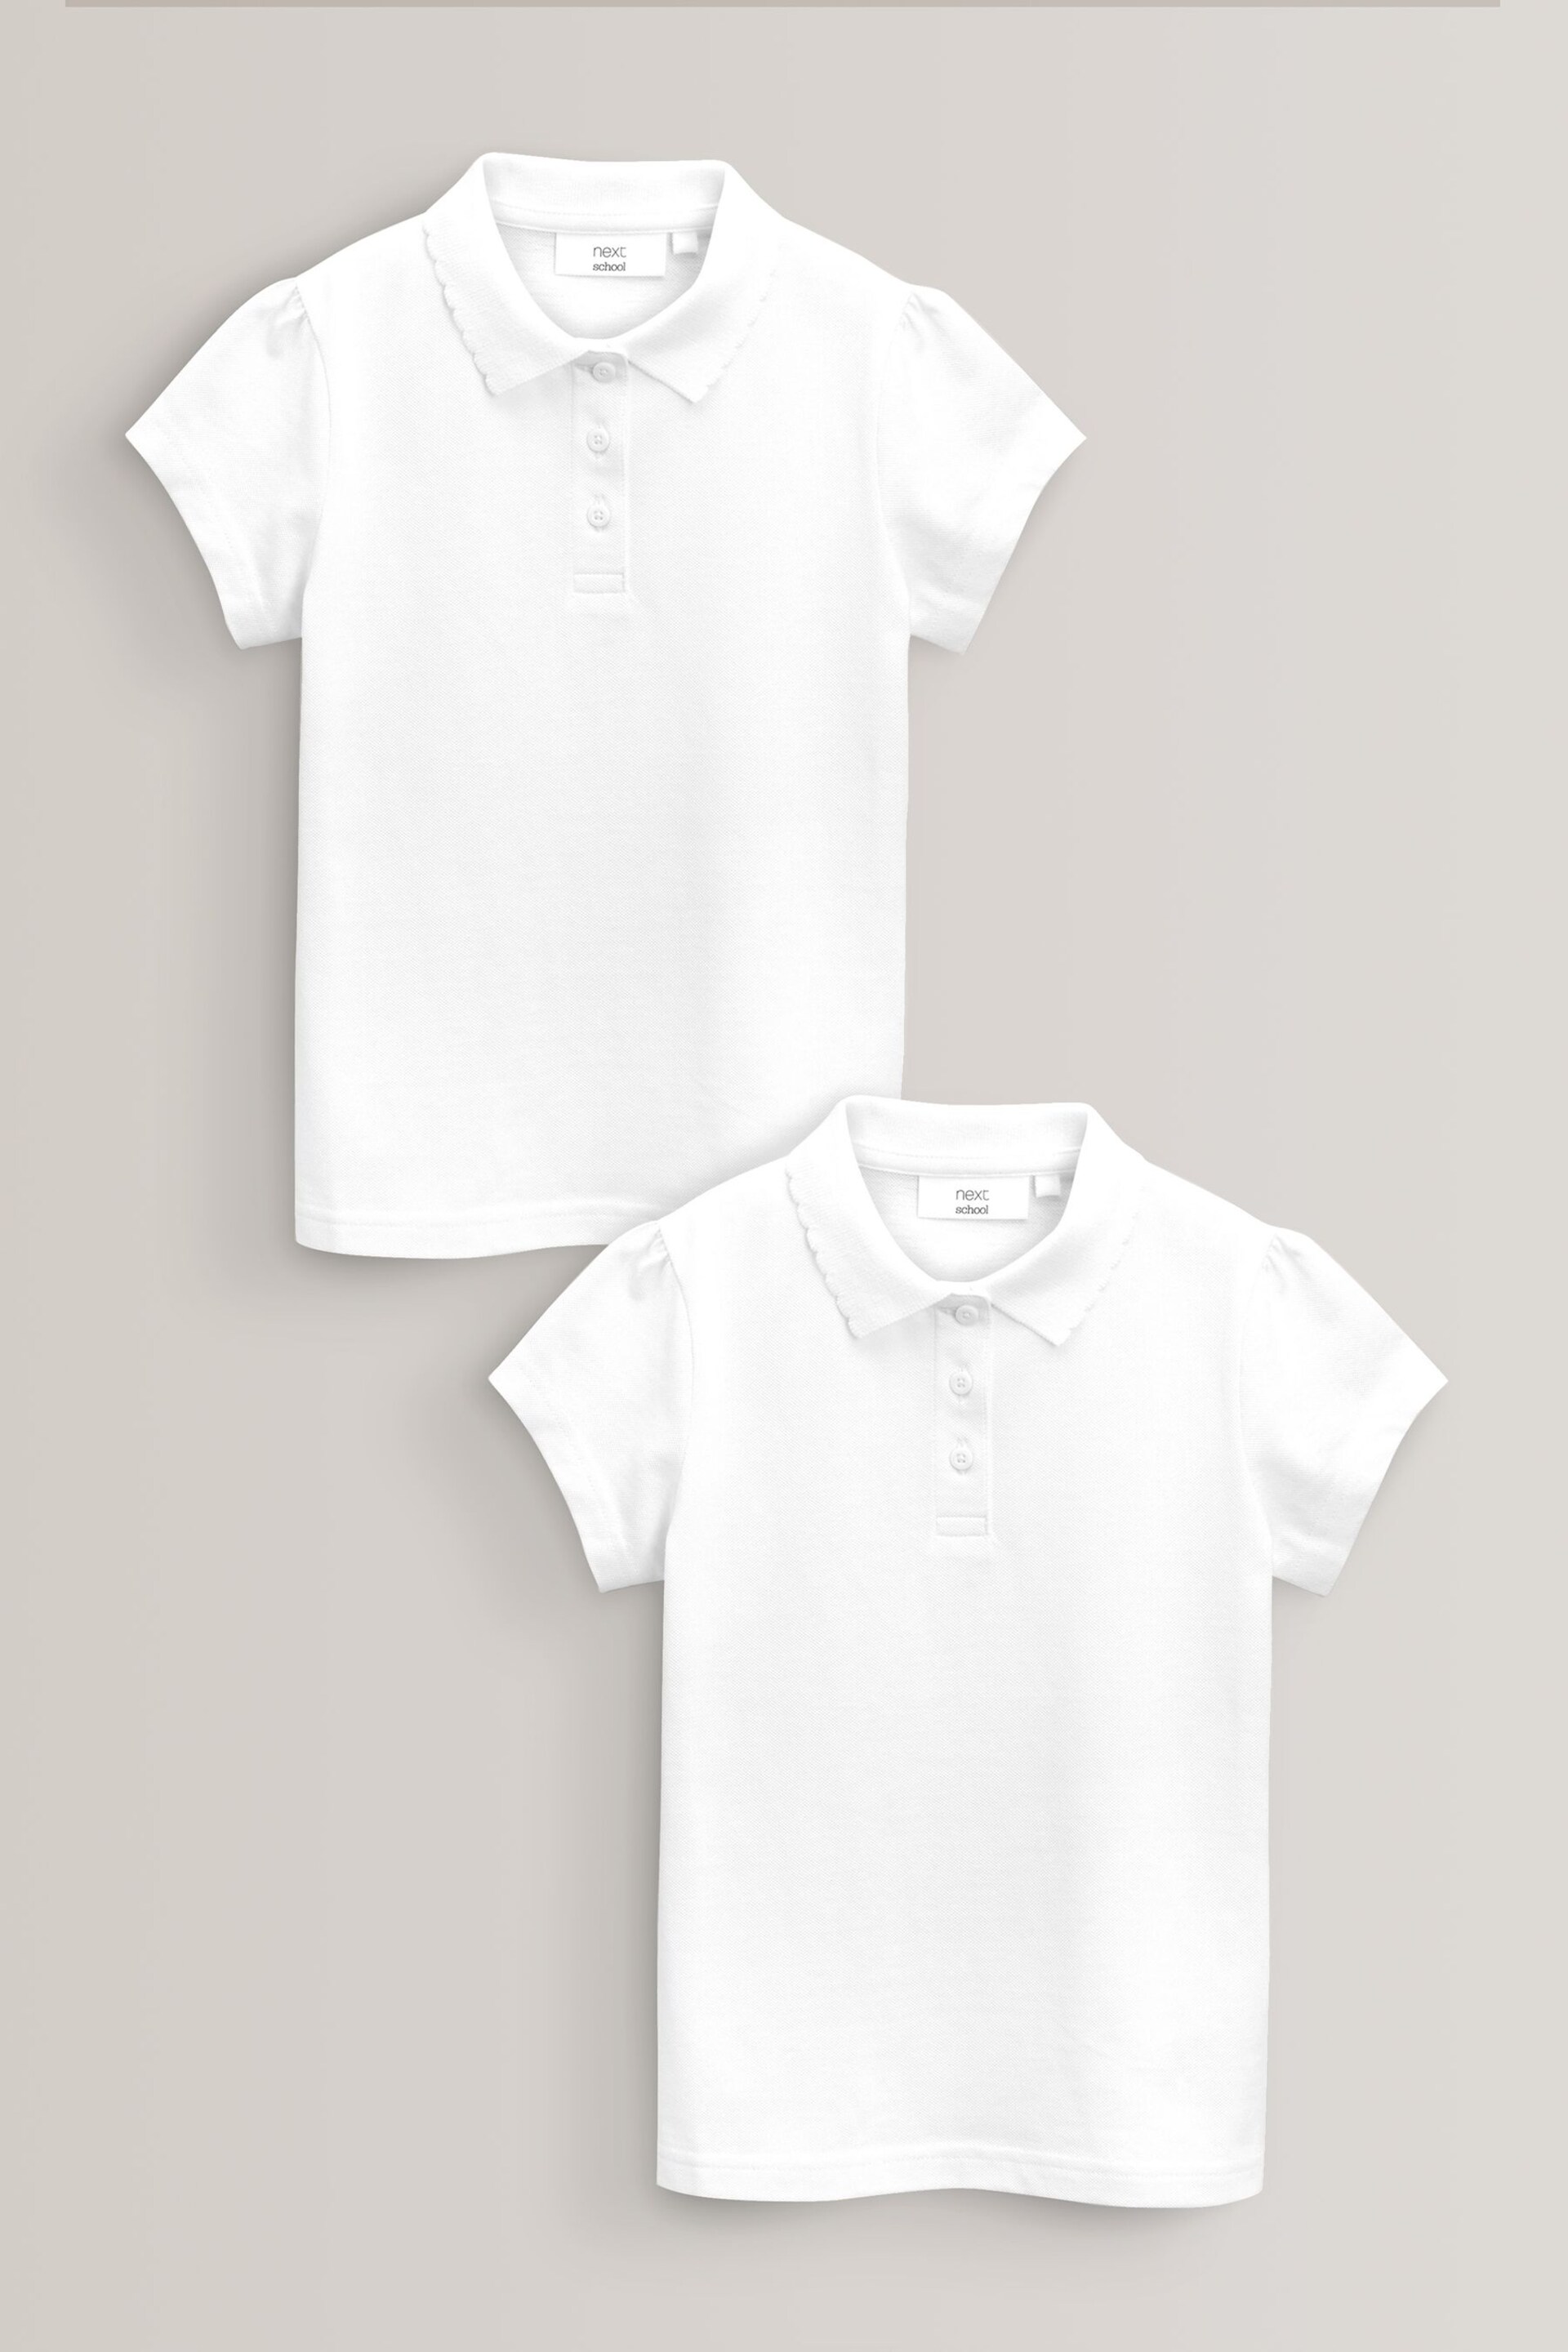 White Regular Fit Cotton Short Sleeve Polo Shirts 2 Pack (3-16yrs) - Image 1 of 6